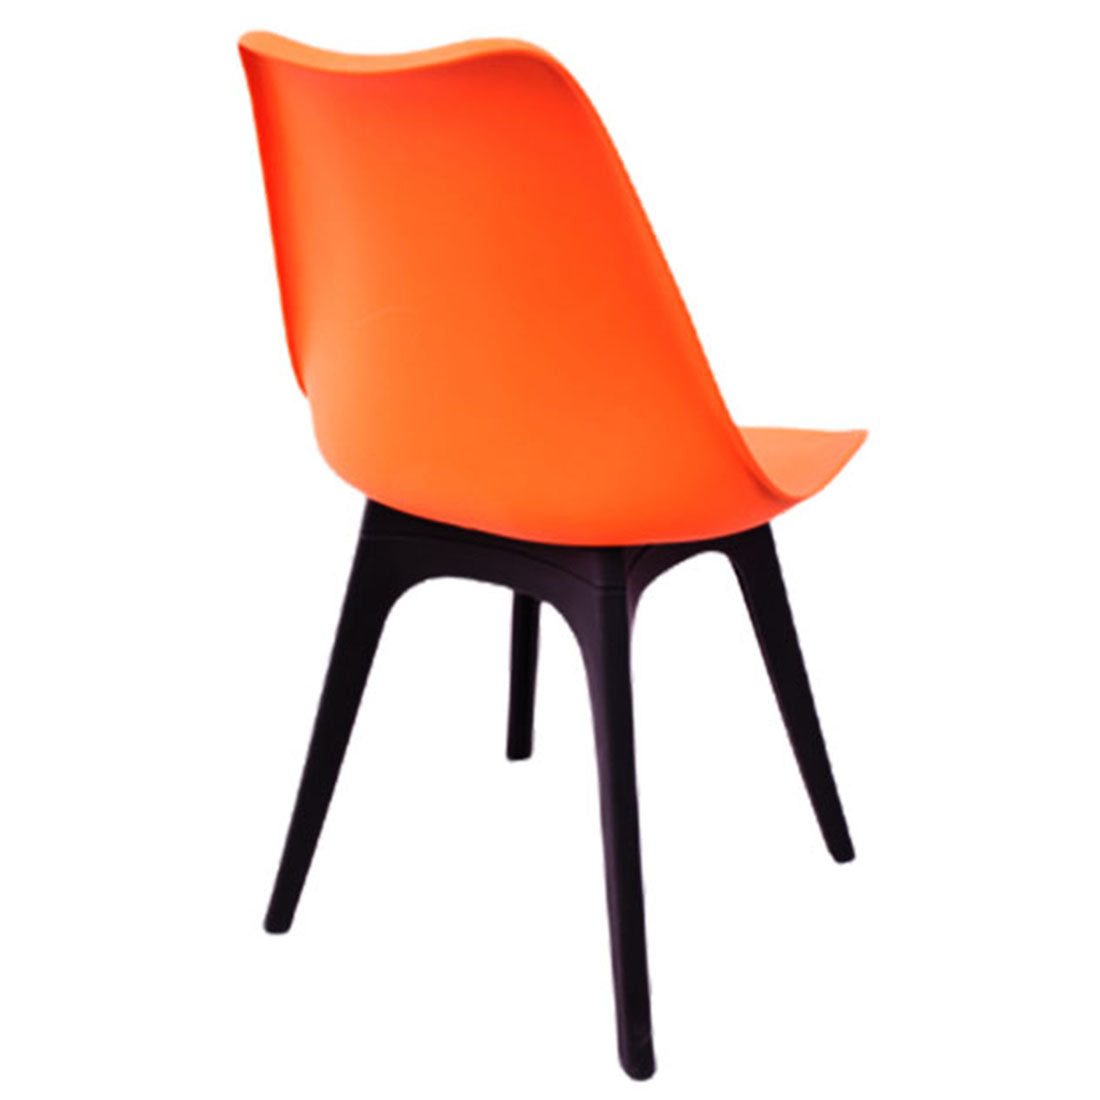 Dining Chair Wood Base Plastic Cafeteria Chair (Orange)